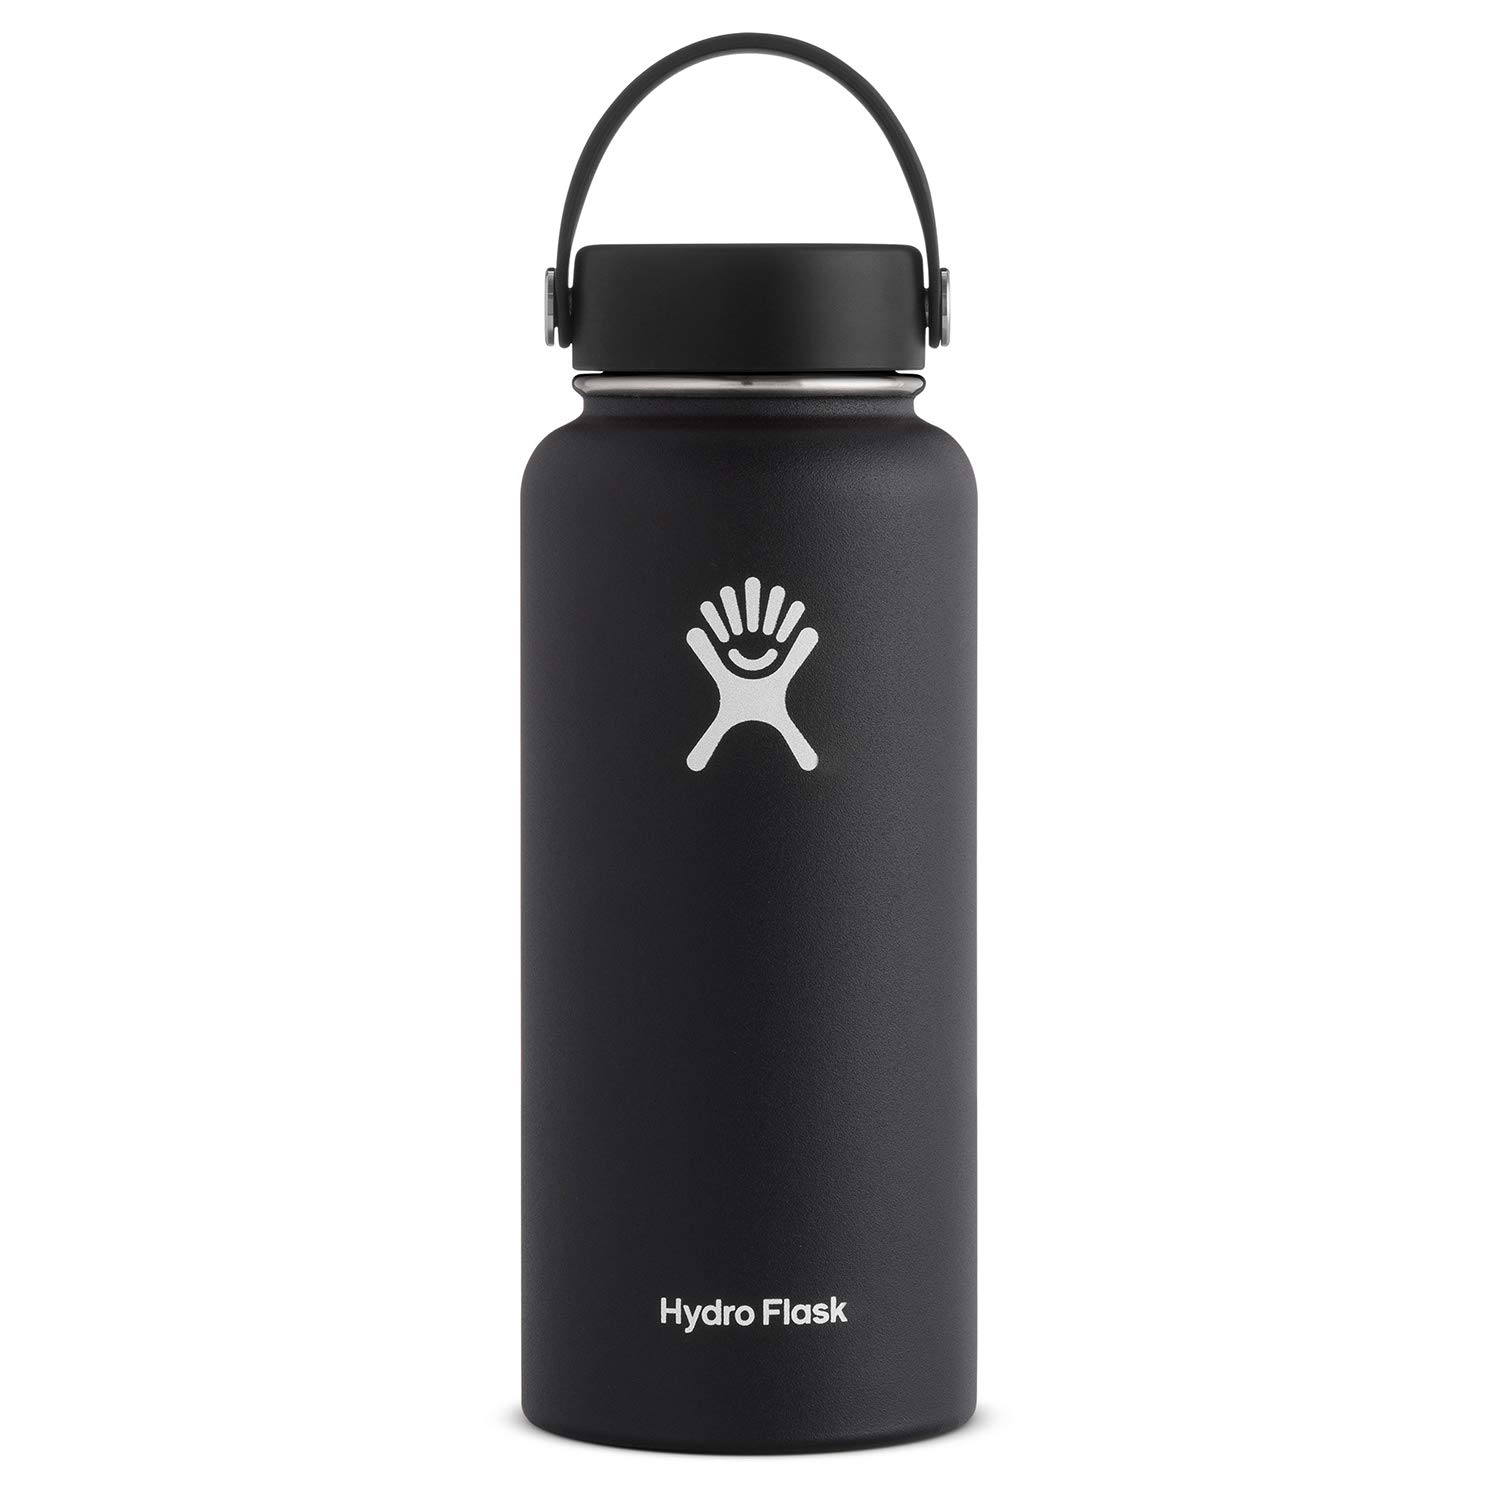 Hydro Flask Water Bottle - Stainless Steel & Vacuum Insulated - Wide Mouth with Leak Proof Flex Cap - 32 oz, Black